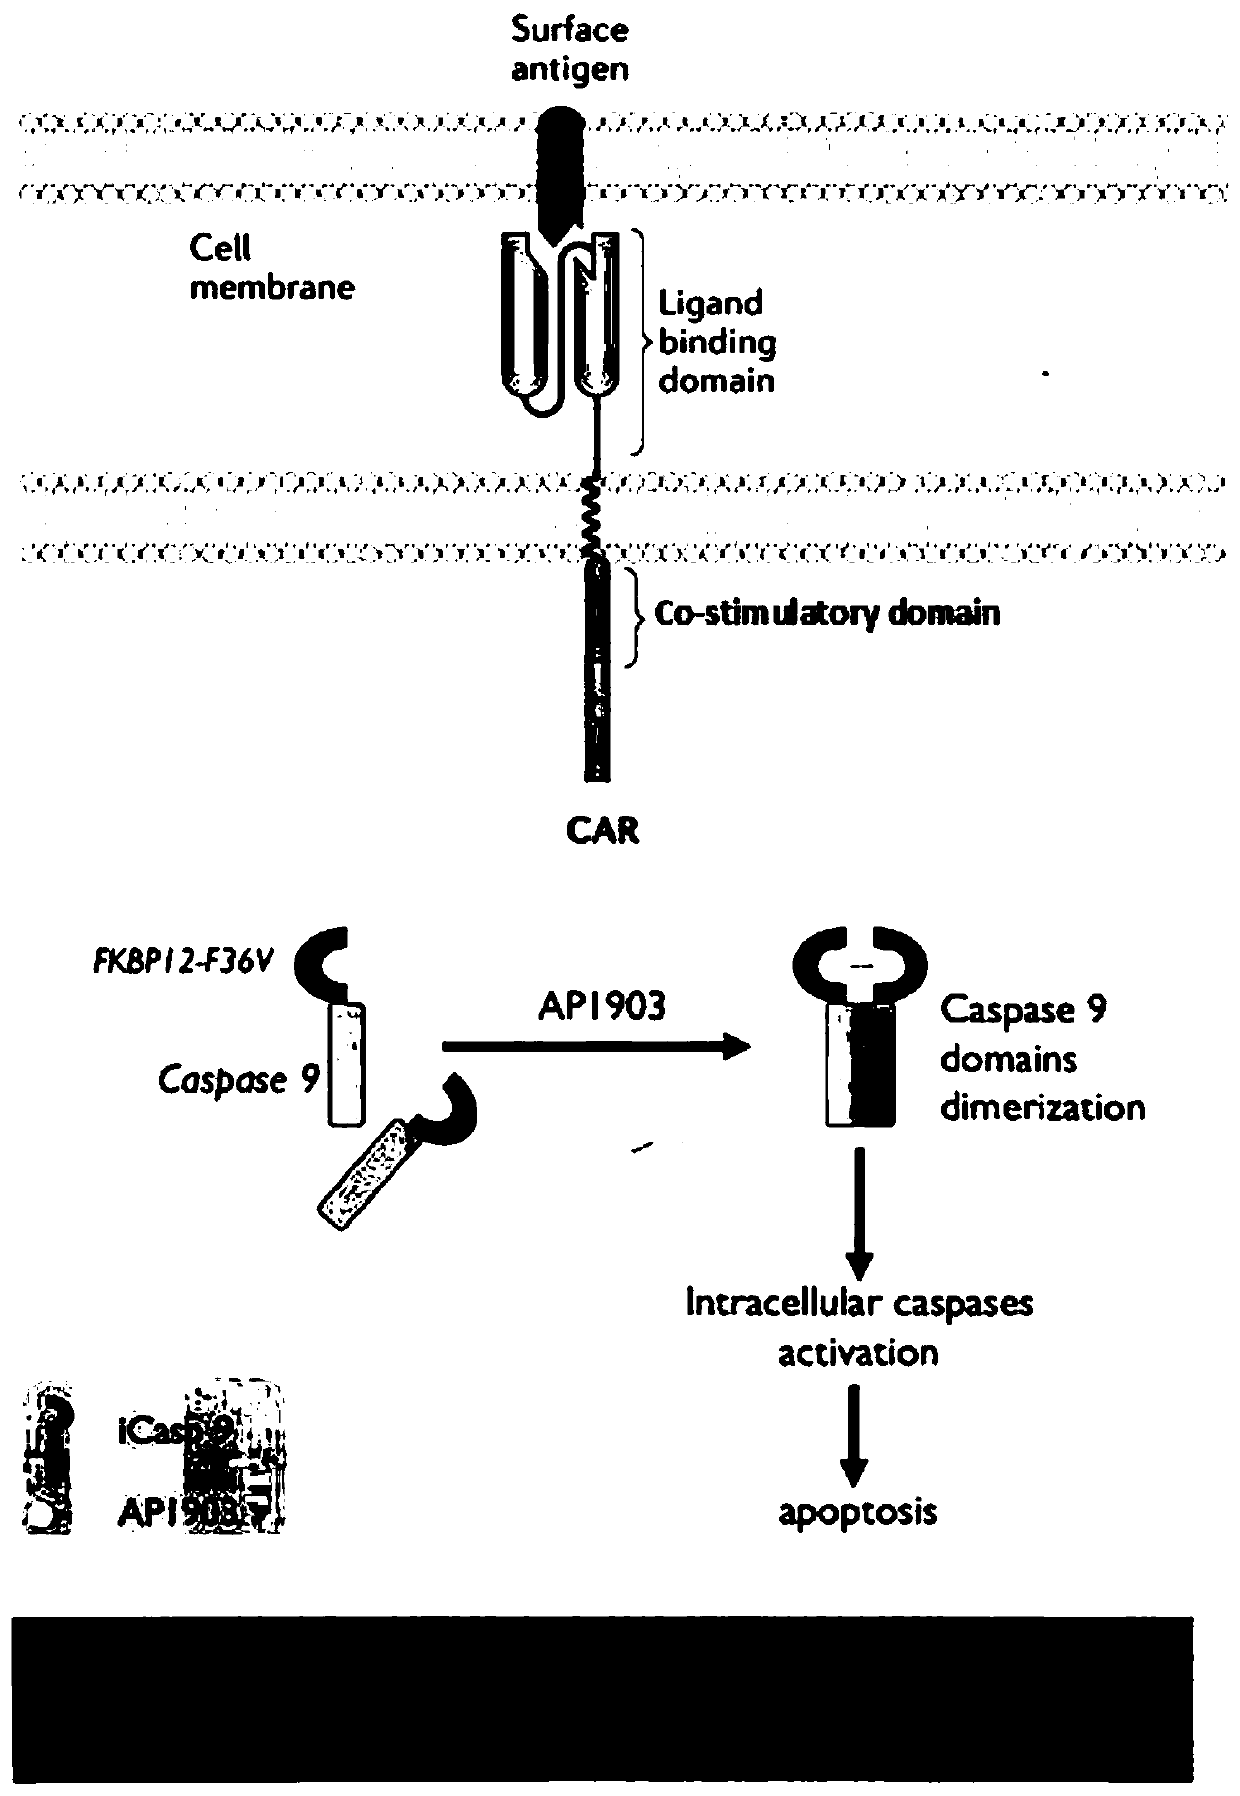 An anti-ror1 safe chimeric antigen receptor-modified immune cell and its application